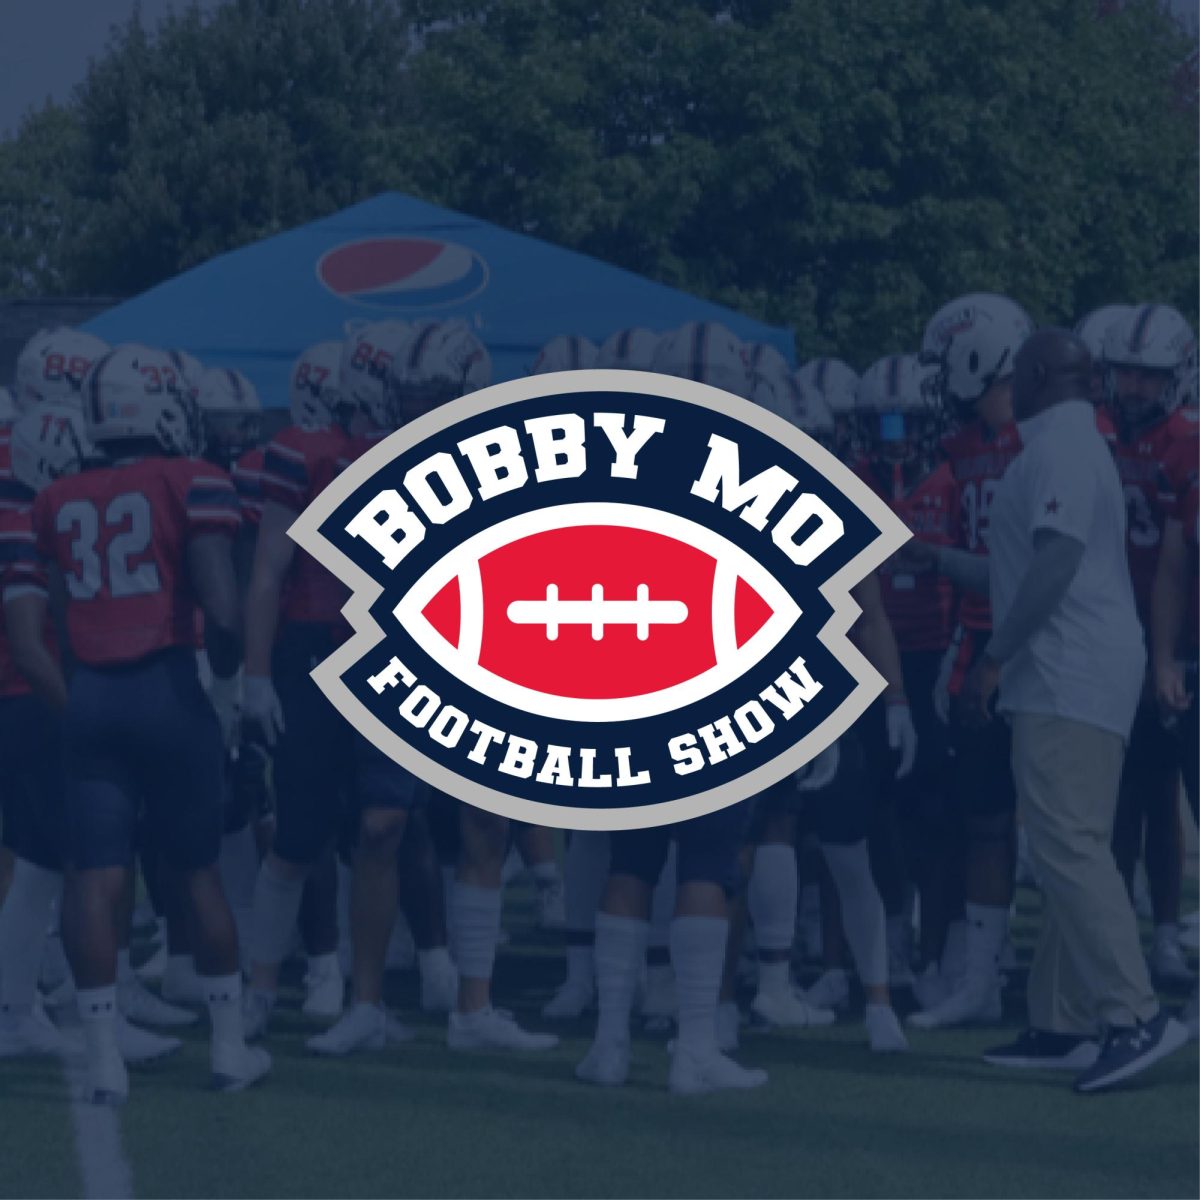 Bobby+Mo+Football+Show%3A+Colonials+Pull+Off+HUGE+Upset+over+SEMO